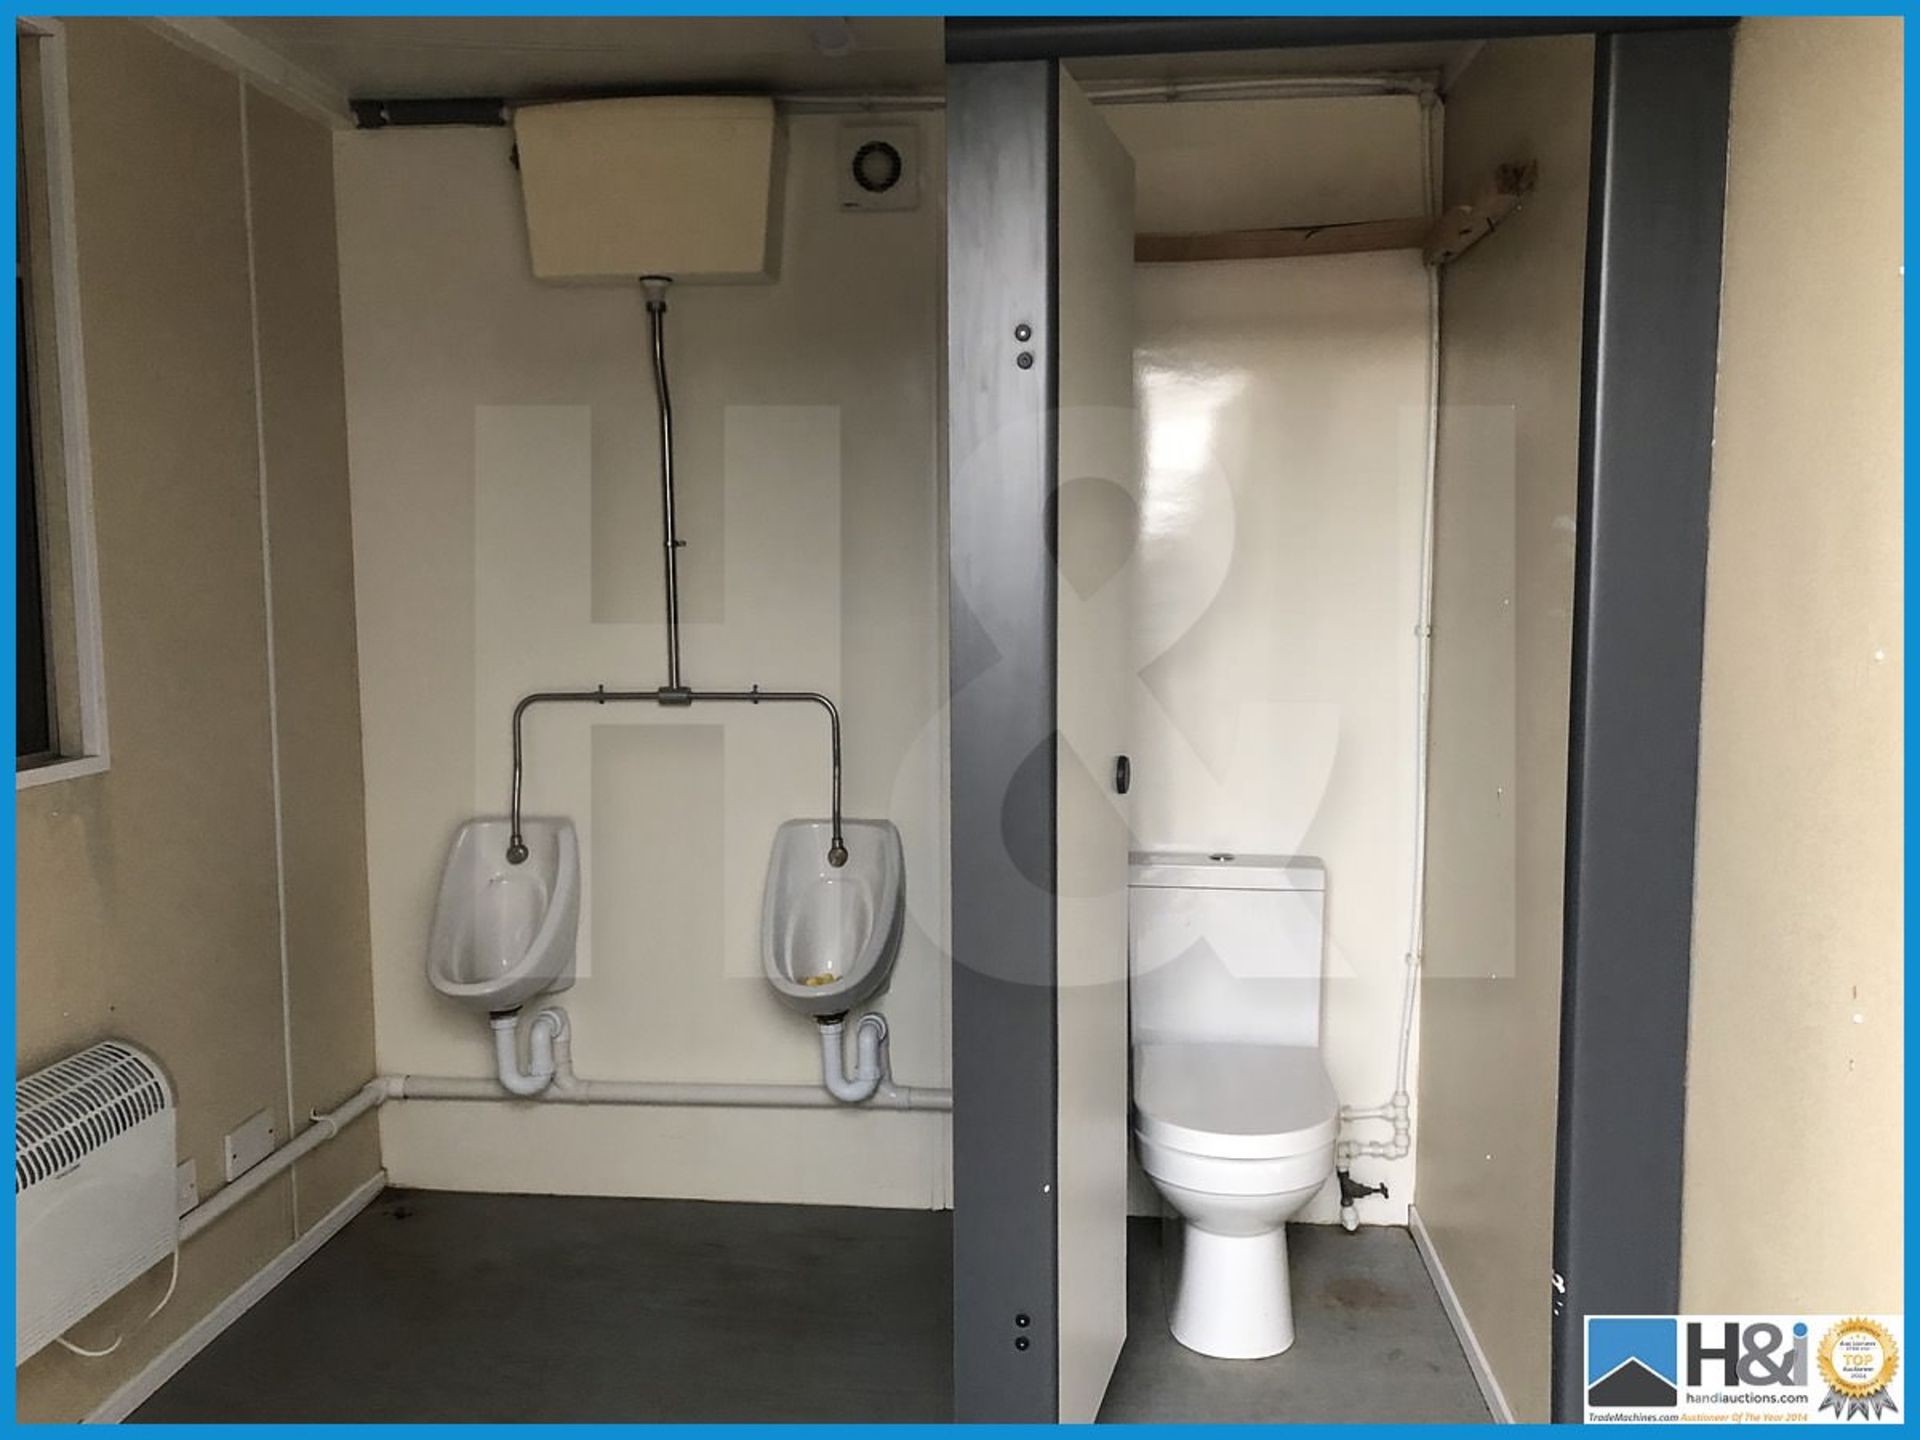 Appx 11ft x 9ft gents site toilet block in excellent condition. Access for a hiab lorry is good. The - Image 3 of 8